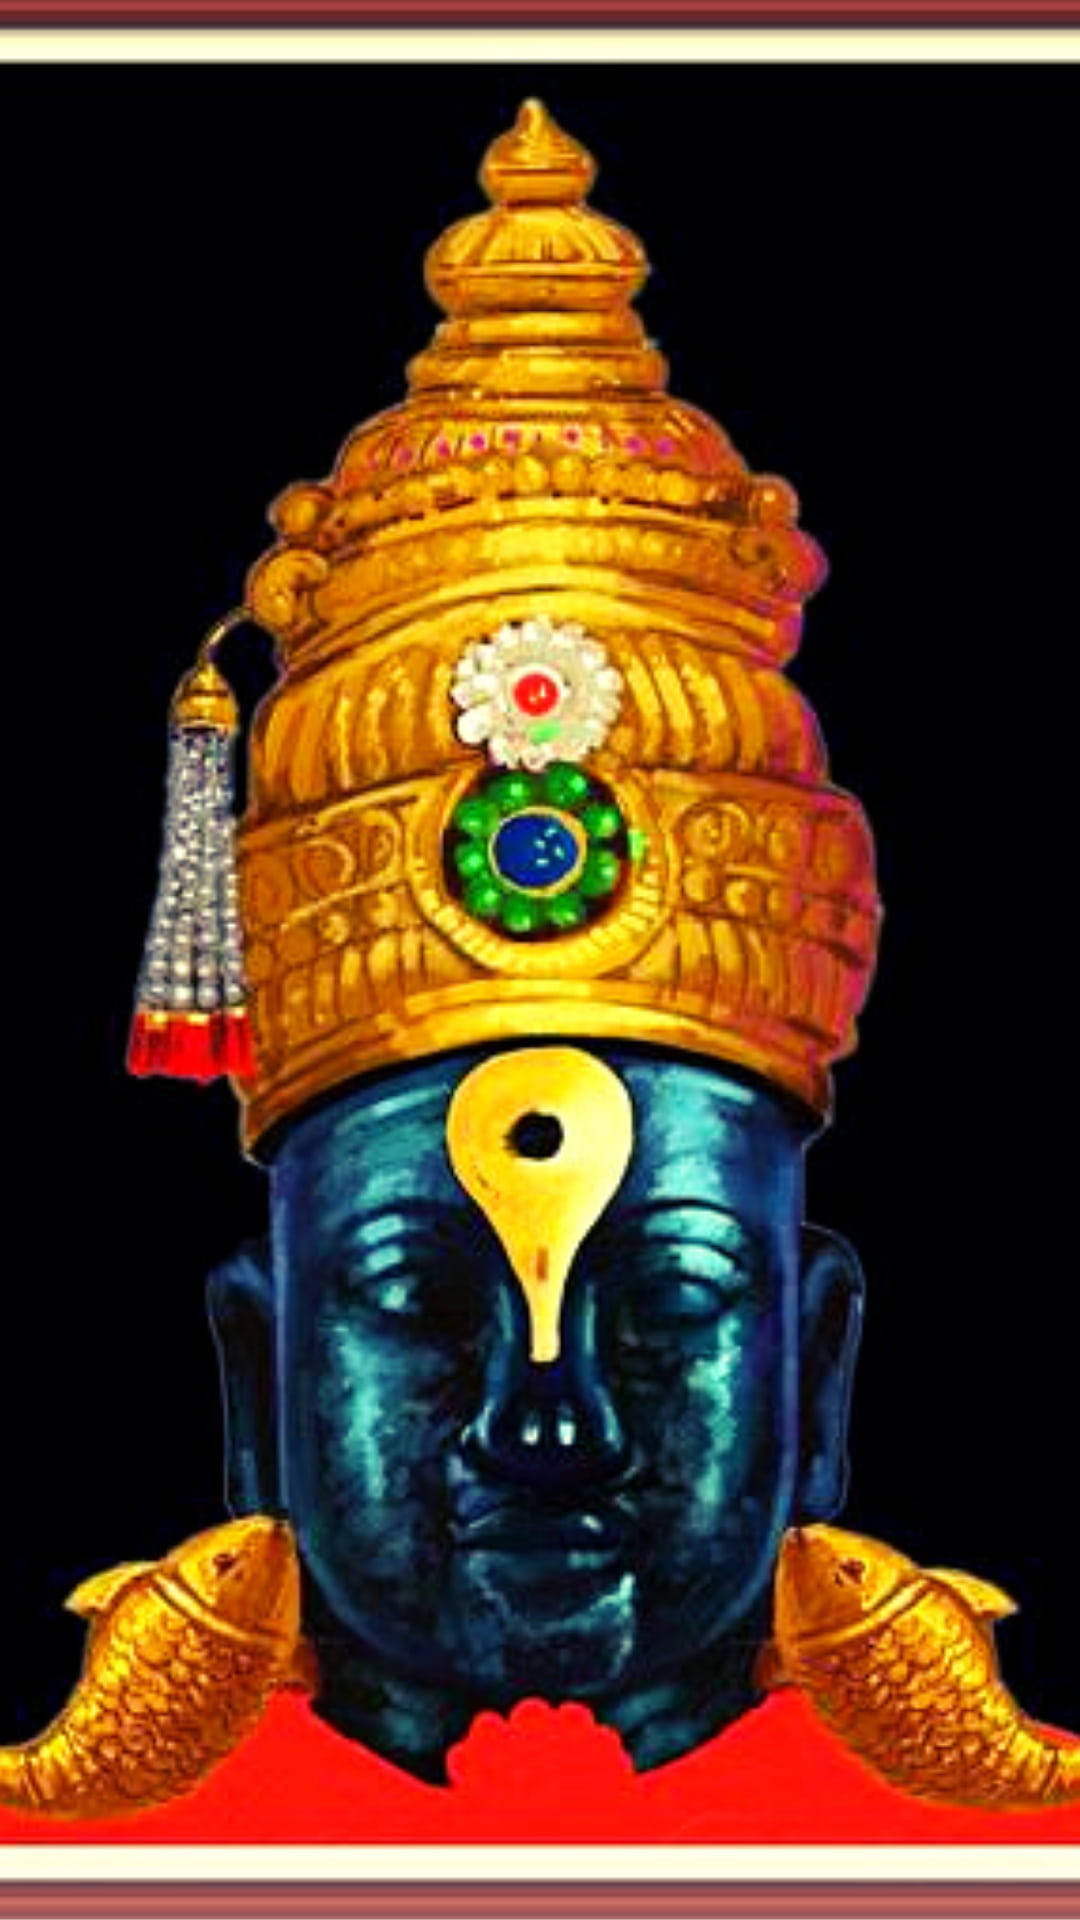 Vitthal With The Gold Kireedam Crown